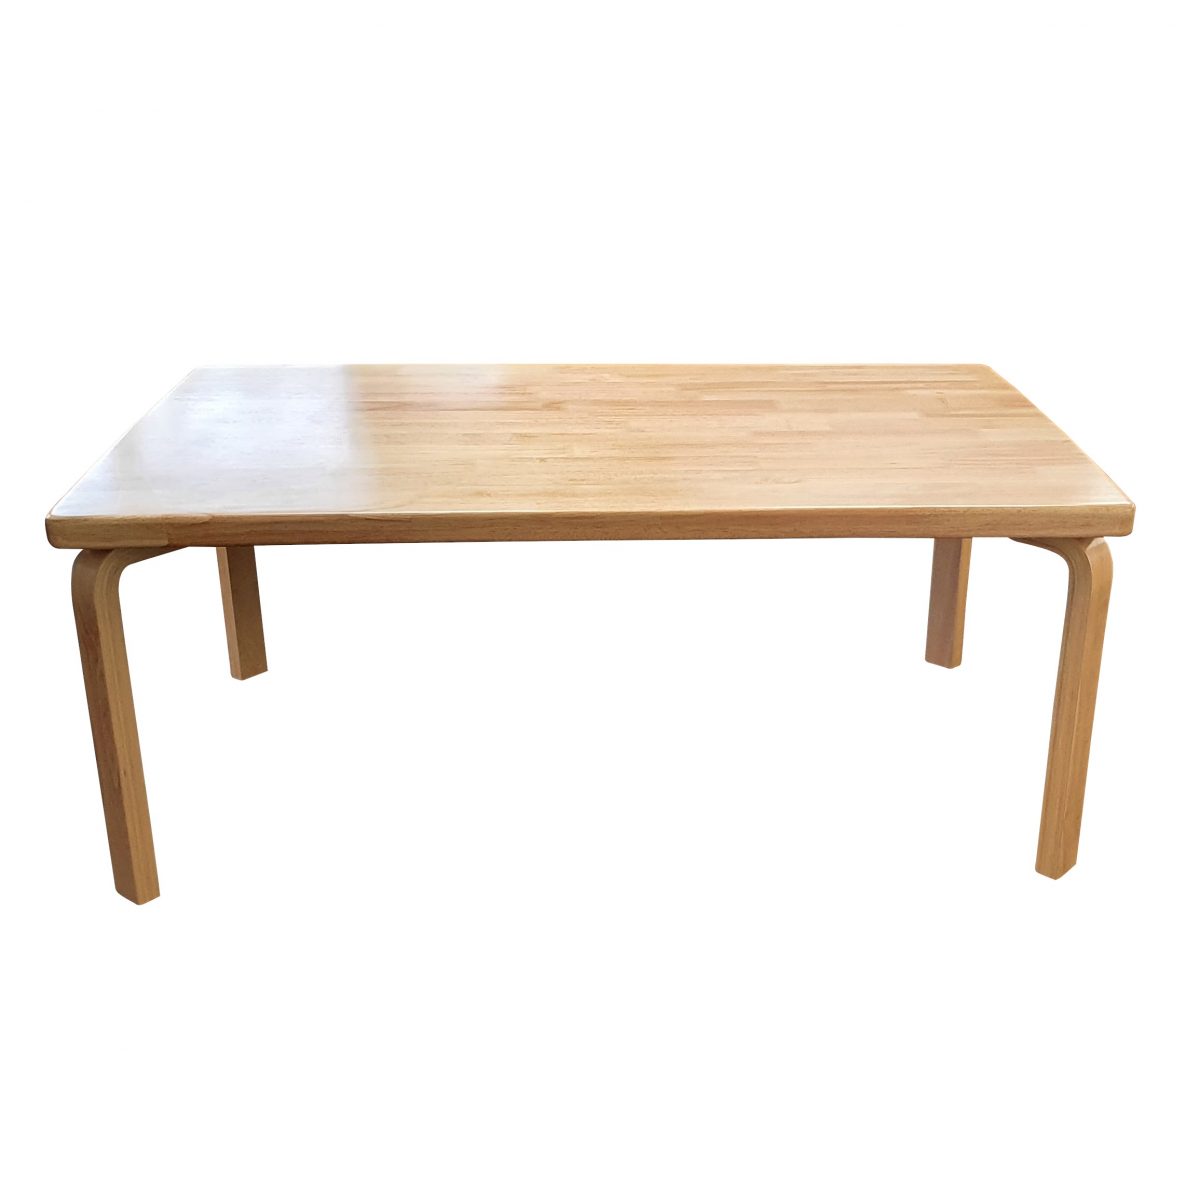 Oakland Table - Rectangle 1200x750